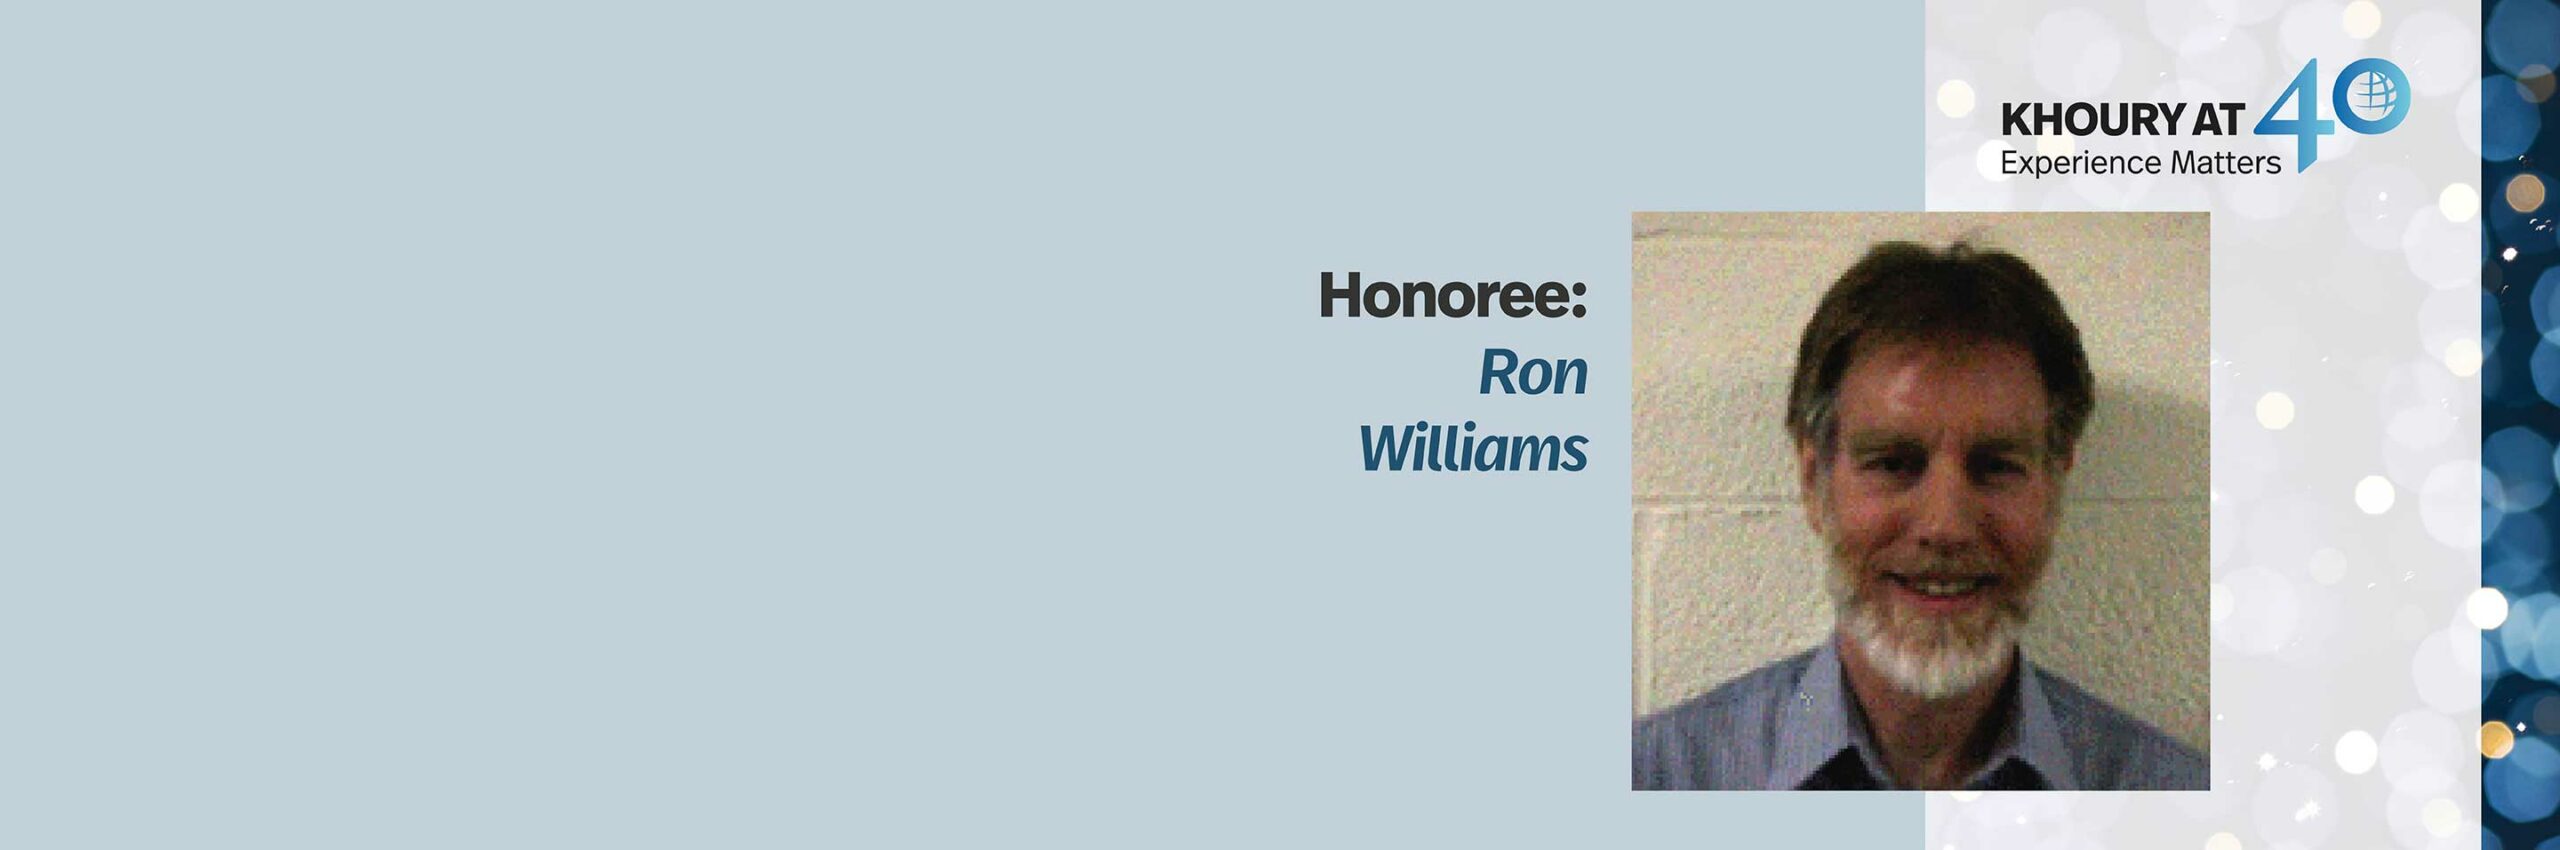 40 for 40 Honoree: Ron Williams